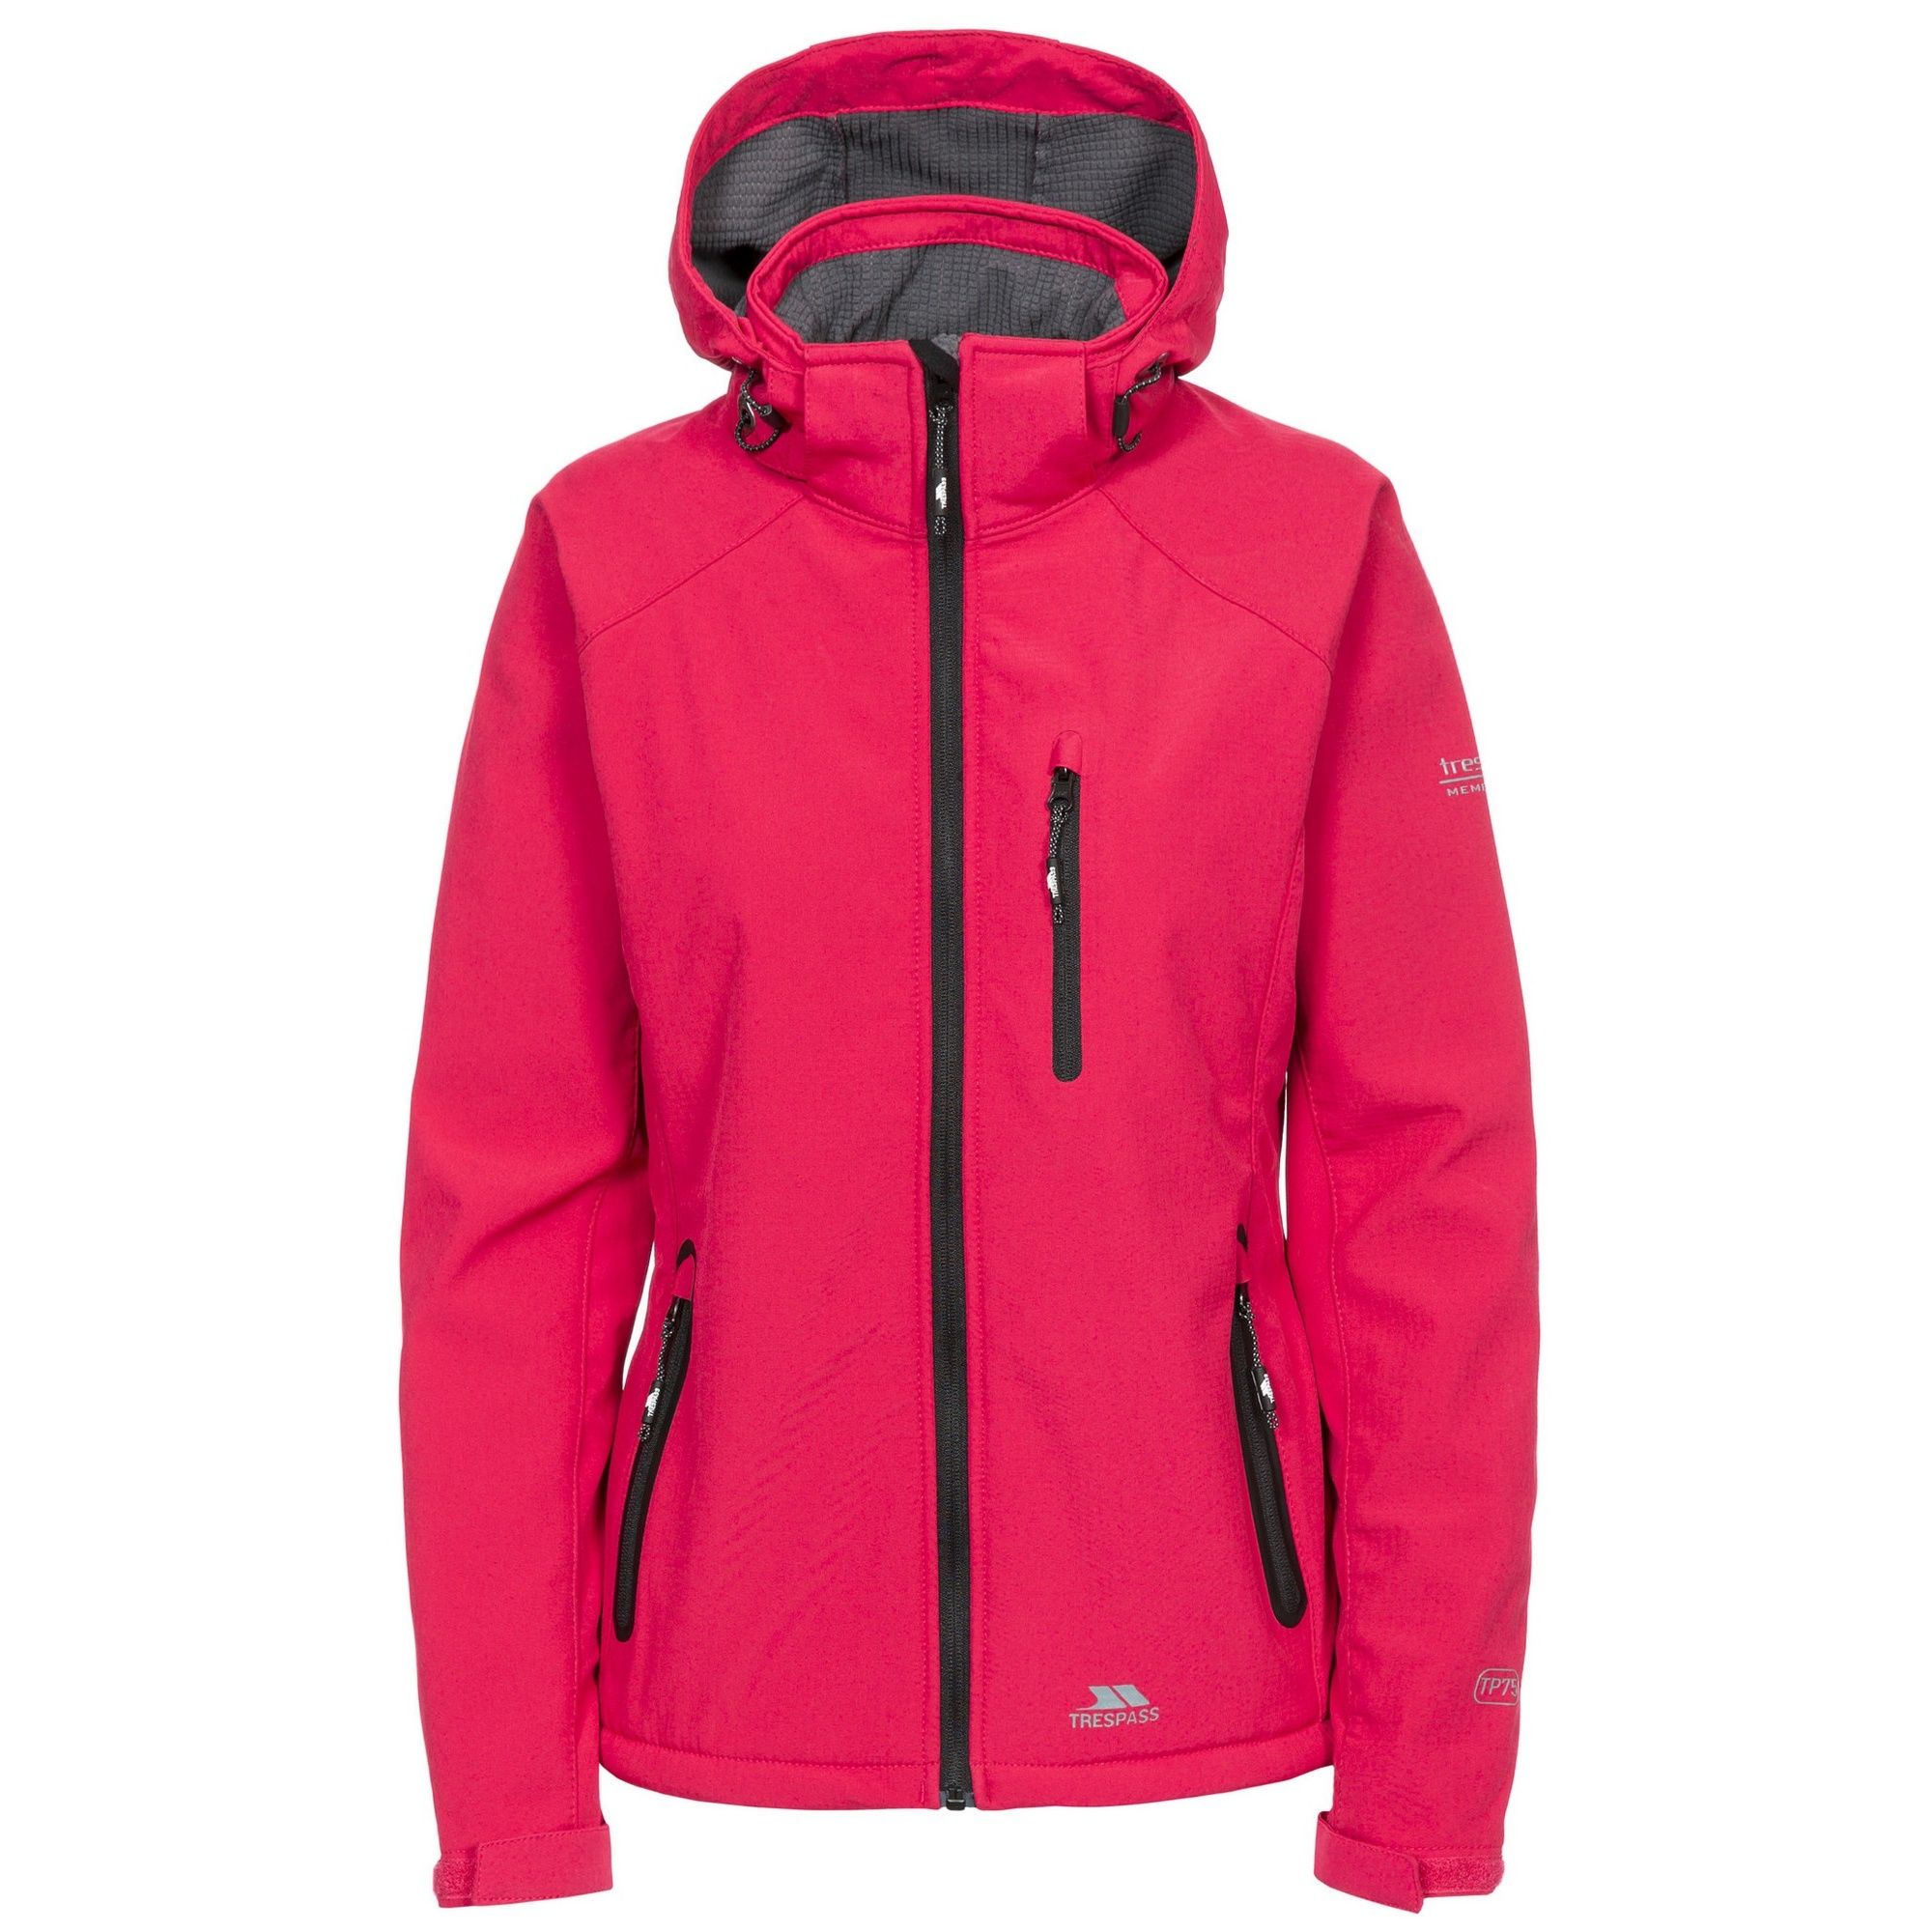 Waterproof jacket with adjustable zip off hood. Contrast zips. 3 low profile zip pockets. Flat cuff with tab adjuster. Chin guard. Drawcord at hem. Waterproof 8000mm, breathable 3000mvp, windproof. 94% polyester, 4% elastane, TPU membrane. Trespass Womens Chest Sizing (approx): XS/8 - 32in/81cm, S/10 - 34in/86cm, M/12 - 36in/91.4cm, L/14 - 38in/96.5cm, XL/16 - 40in/101.5cm, XXL/18 - 42in/106.5cm.